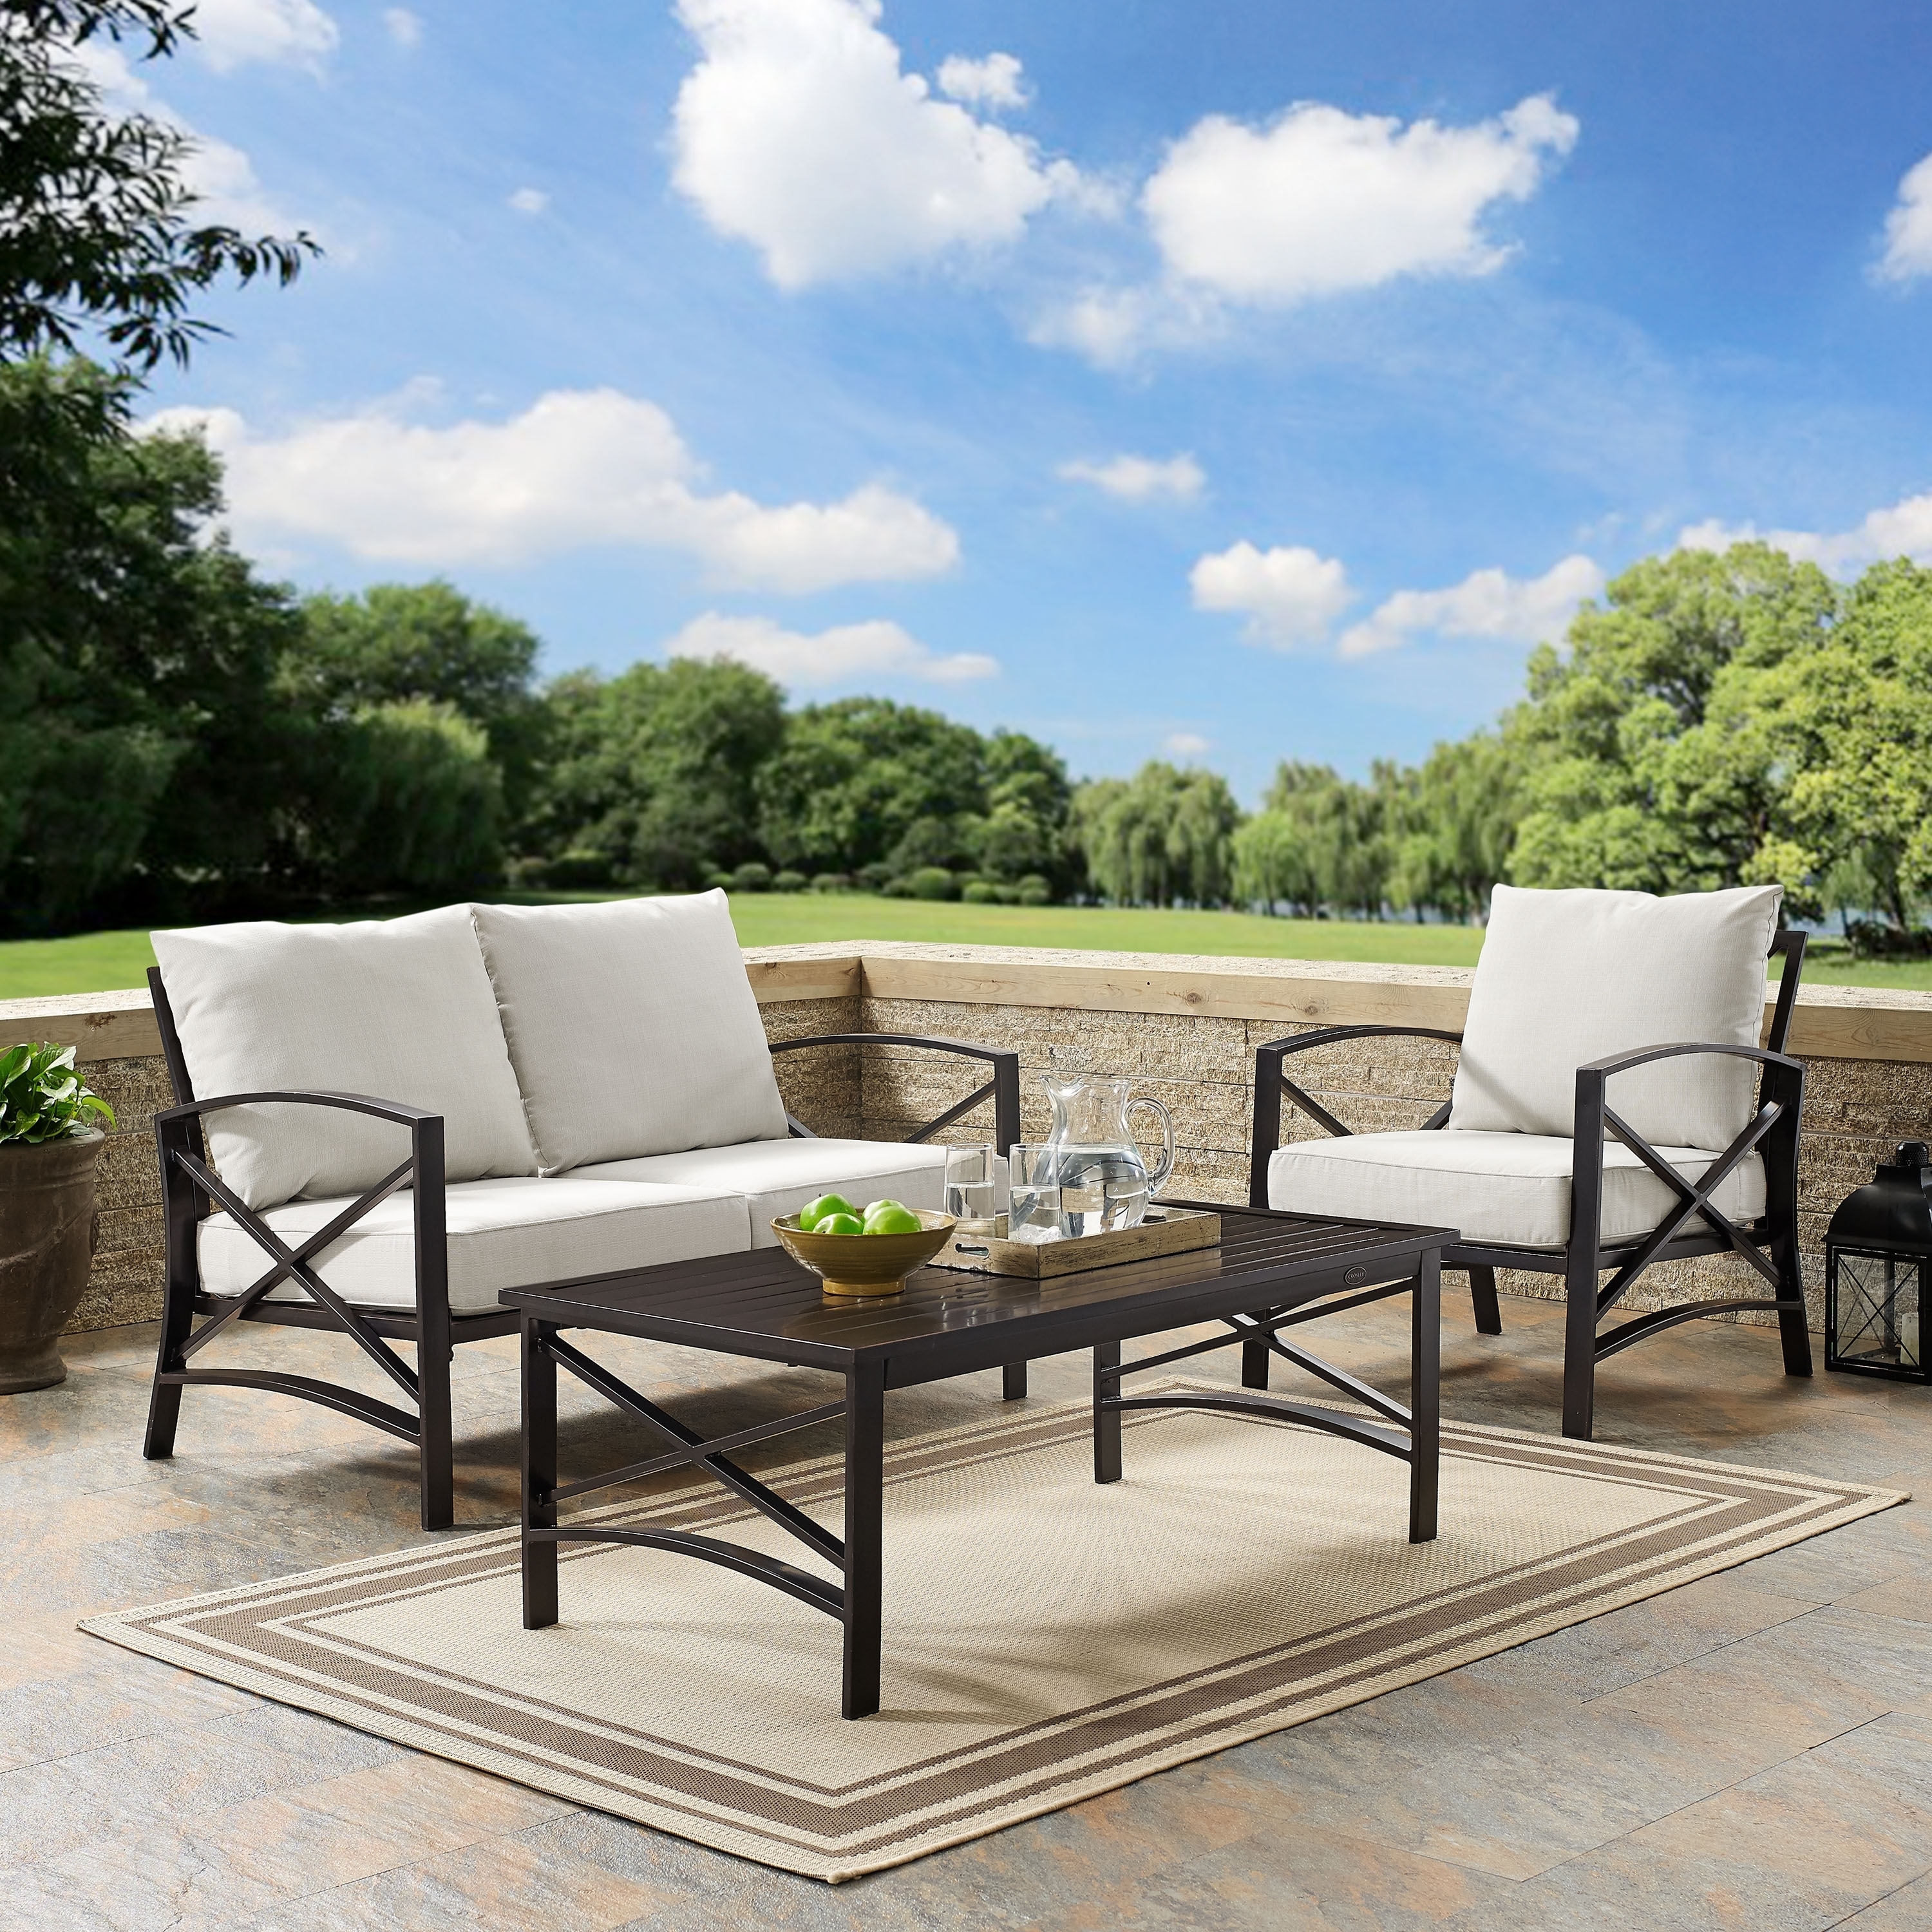 Kaplan 3 Pc Outdoor Seating Set With Oatmeal Cushion - Loveseat  Chair   Coffee Table - 95.5w X 66.5d X 36h